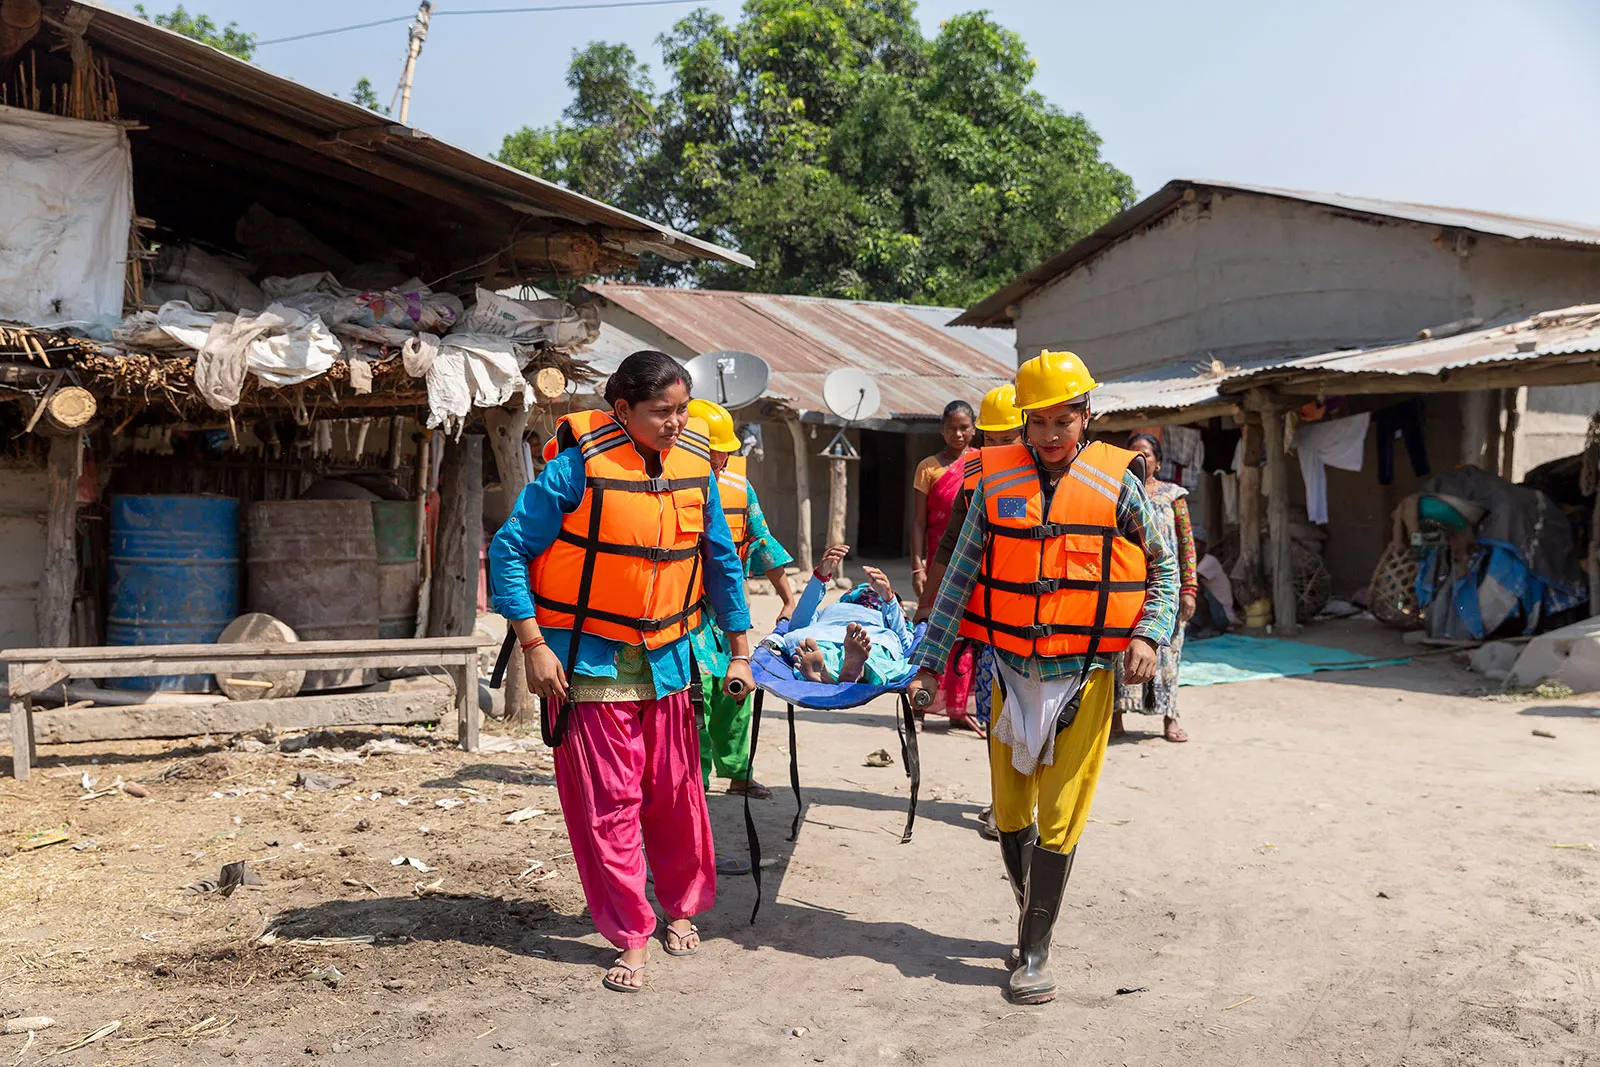 Two emergency workers wearing orange vests carry a stretcher through a village.